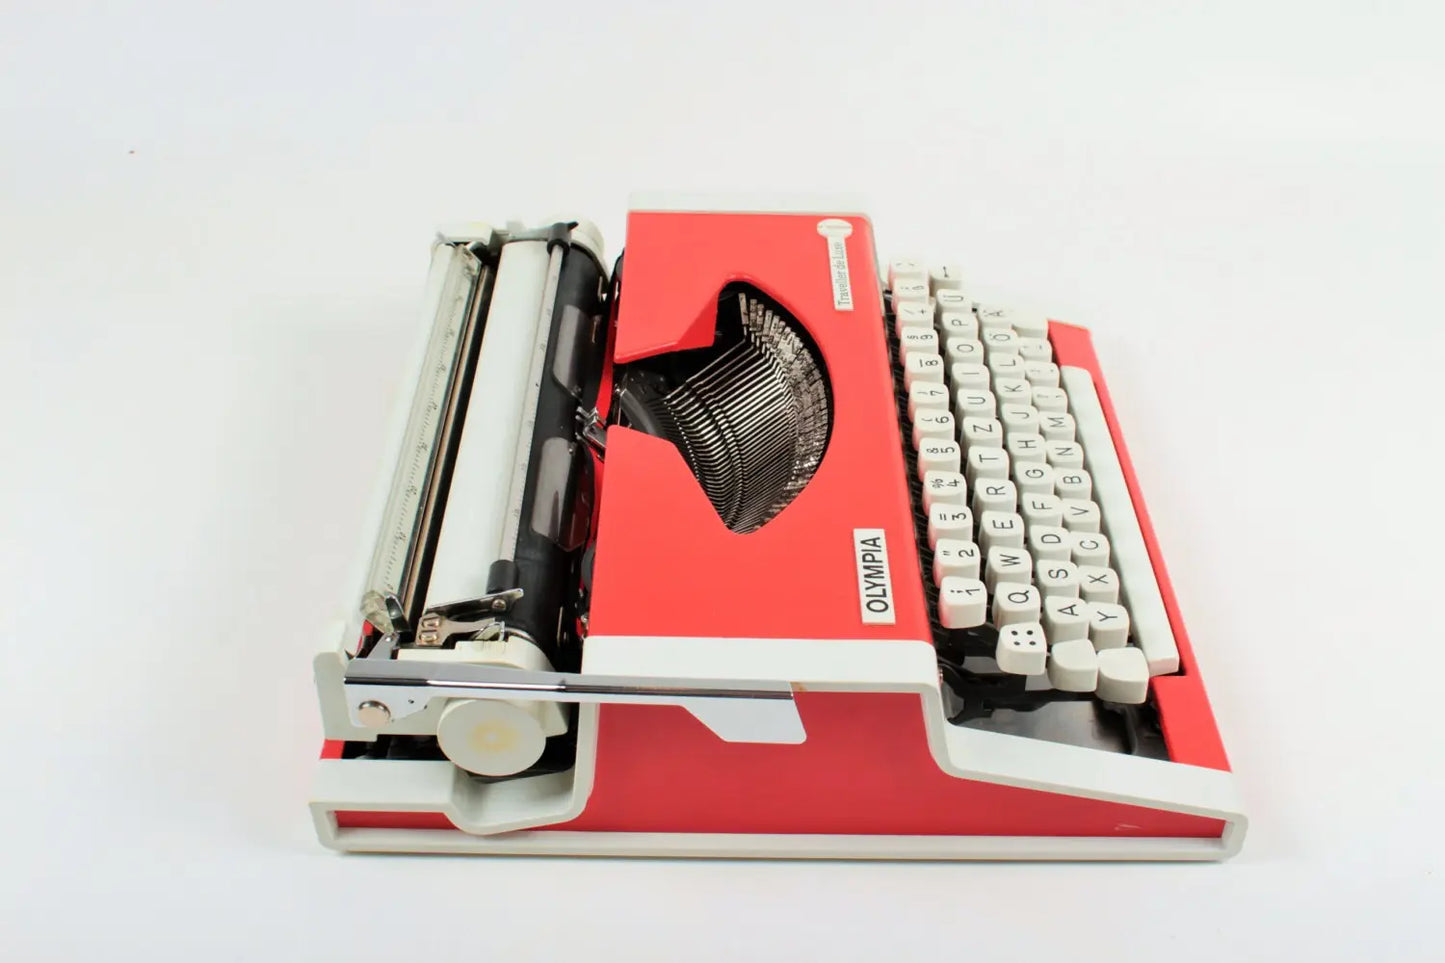 SALE! - Olympia Traveller De Luxe Red Typewriter, Vintage, Professionally Serviced - ElGranero Typewriter.Company